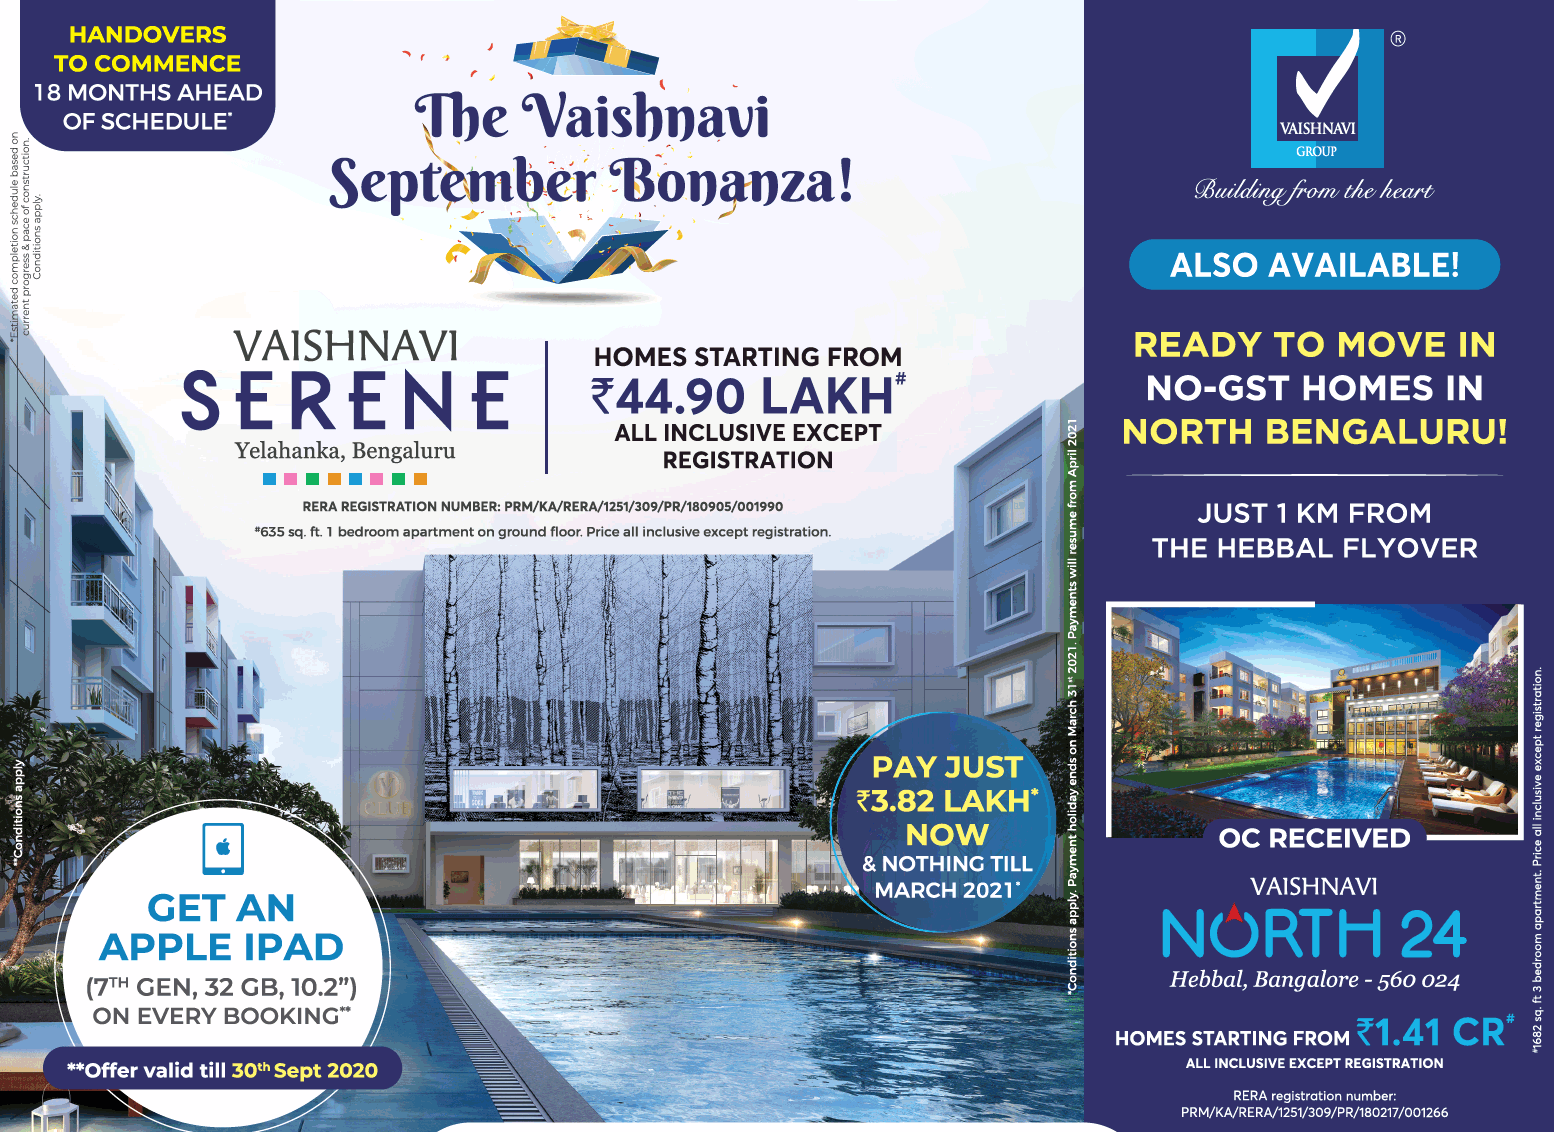 Handover to commence 18 months ahead of schedule at Vaishnavi Serene, Bangalore Update